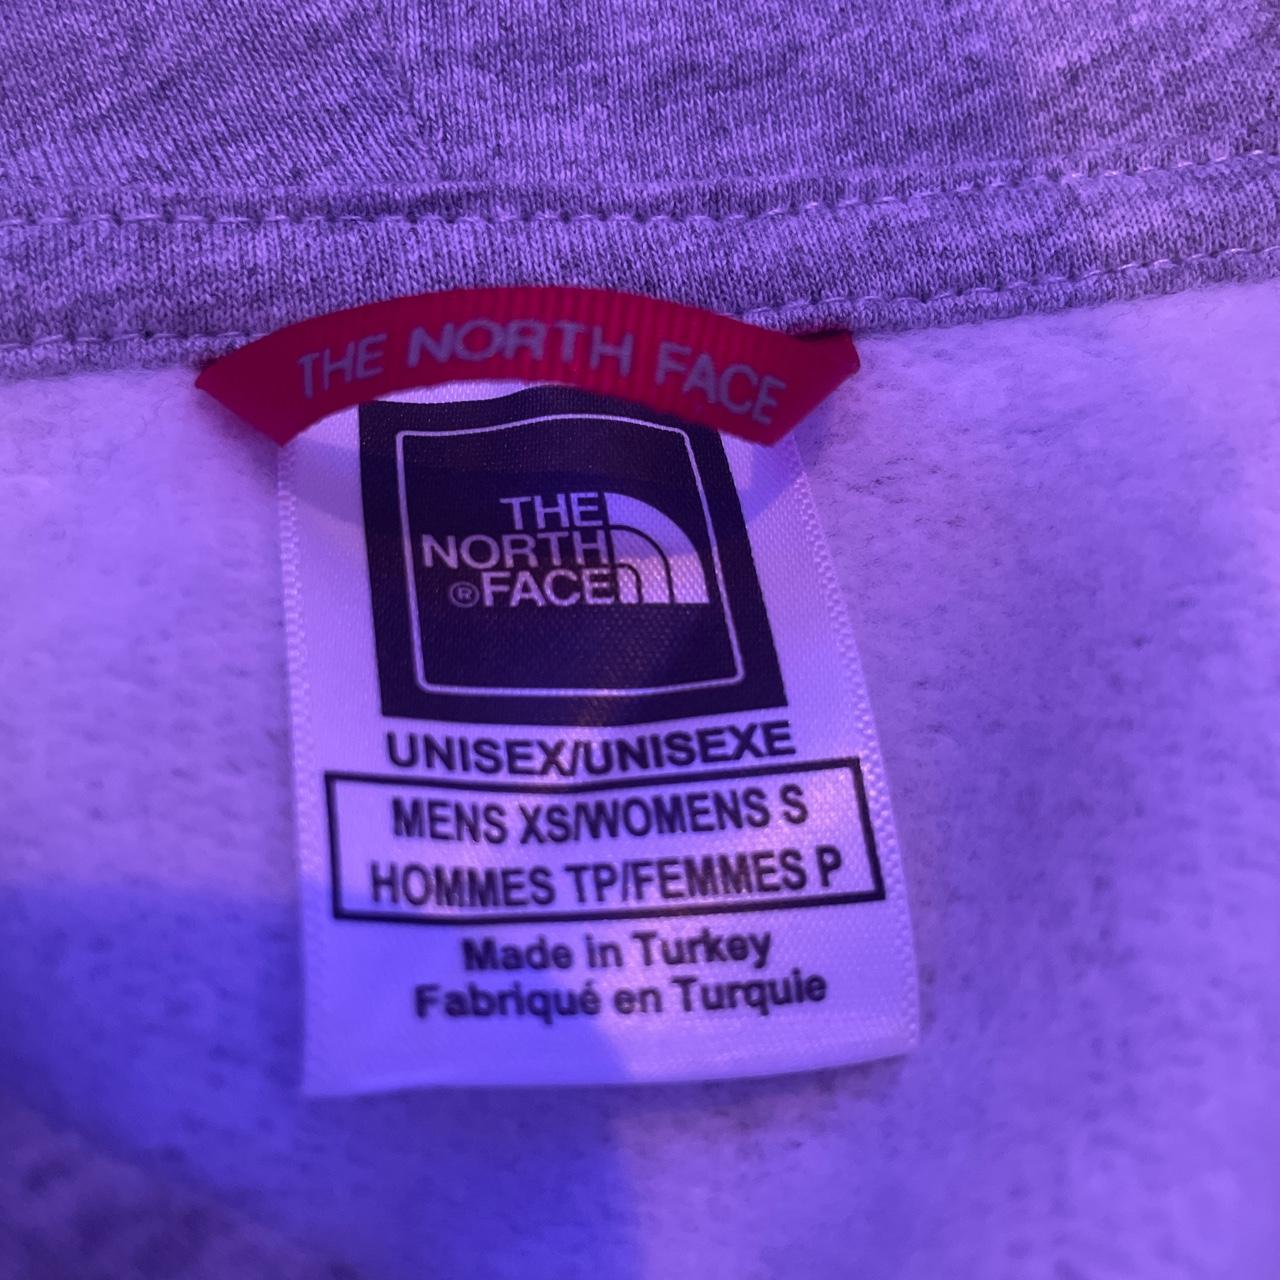 The north face grey hoodie Perfect condition Size... - Depop